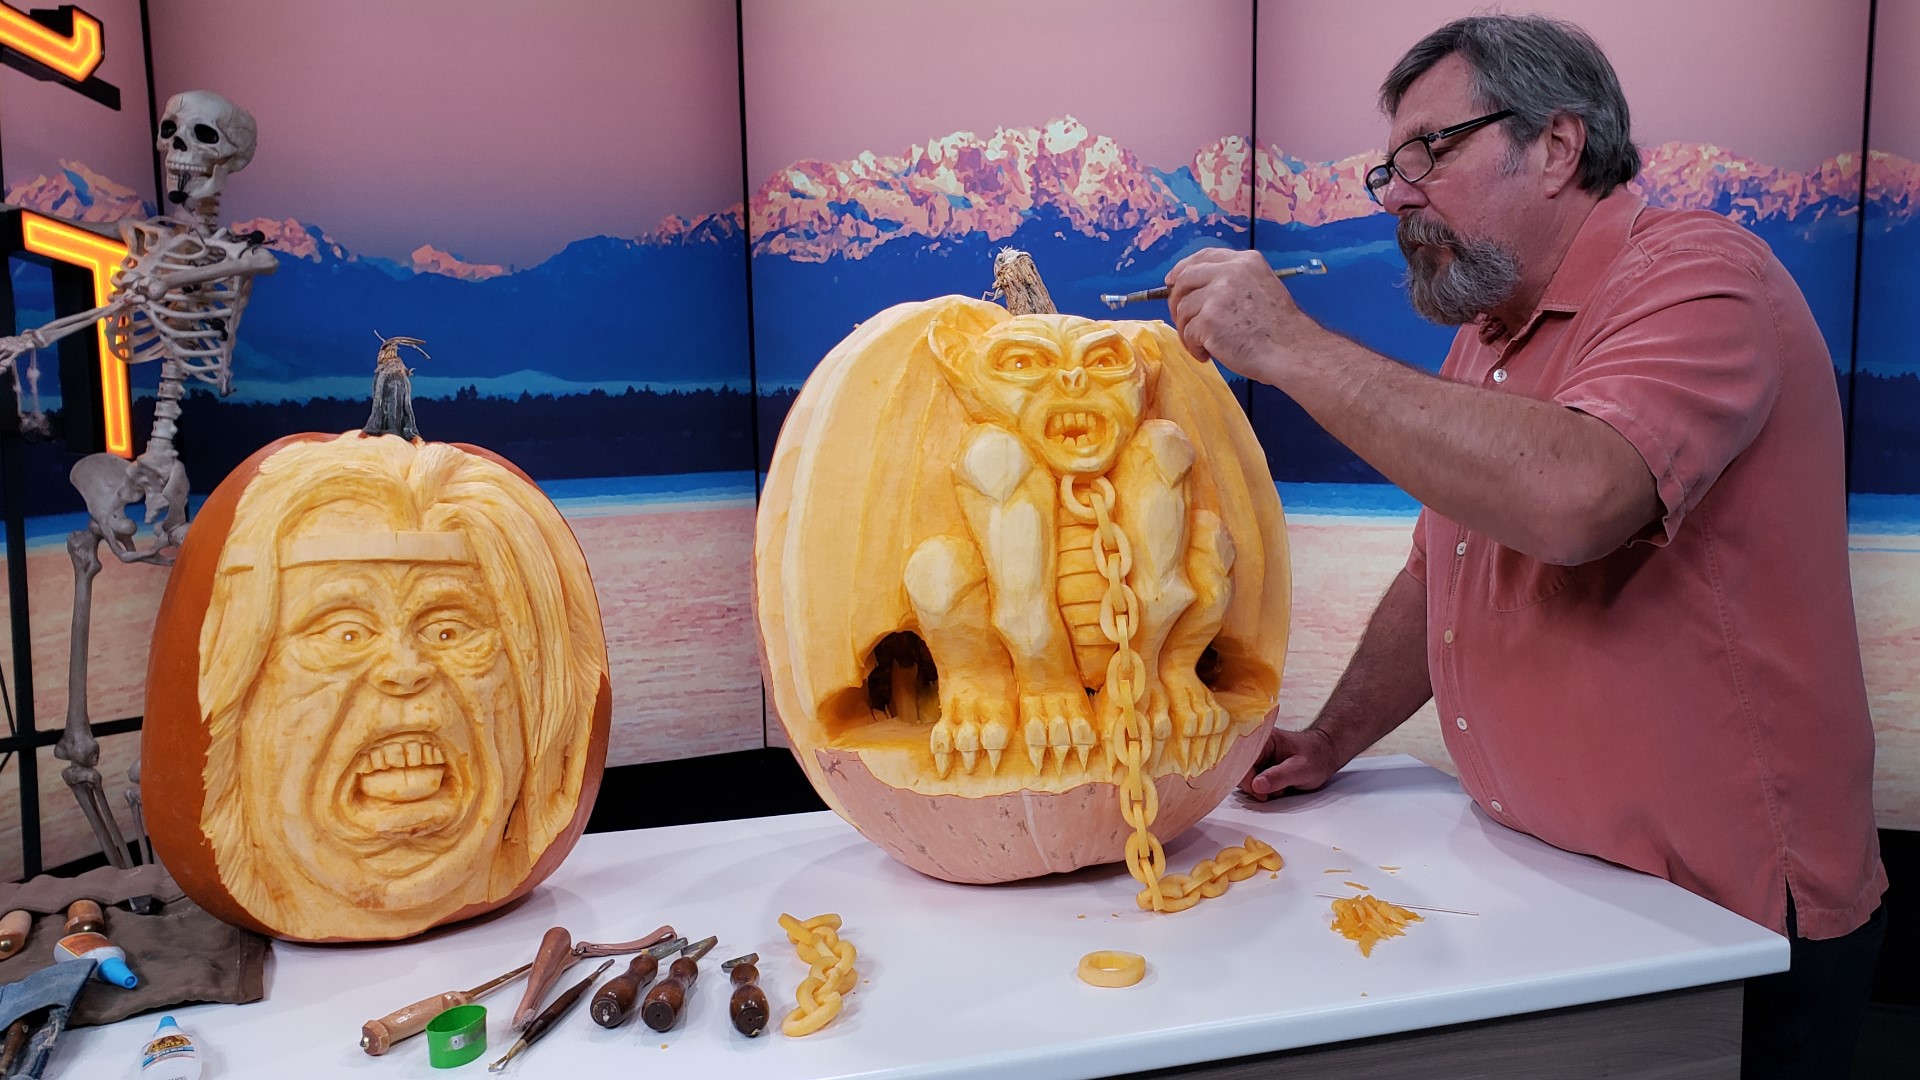 Master pumpkin carver, Russ Leno, is here to share some tips and tricks from his 20+ years of carving.